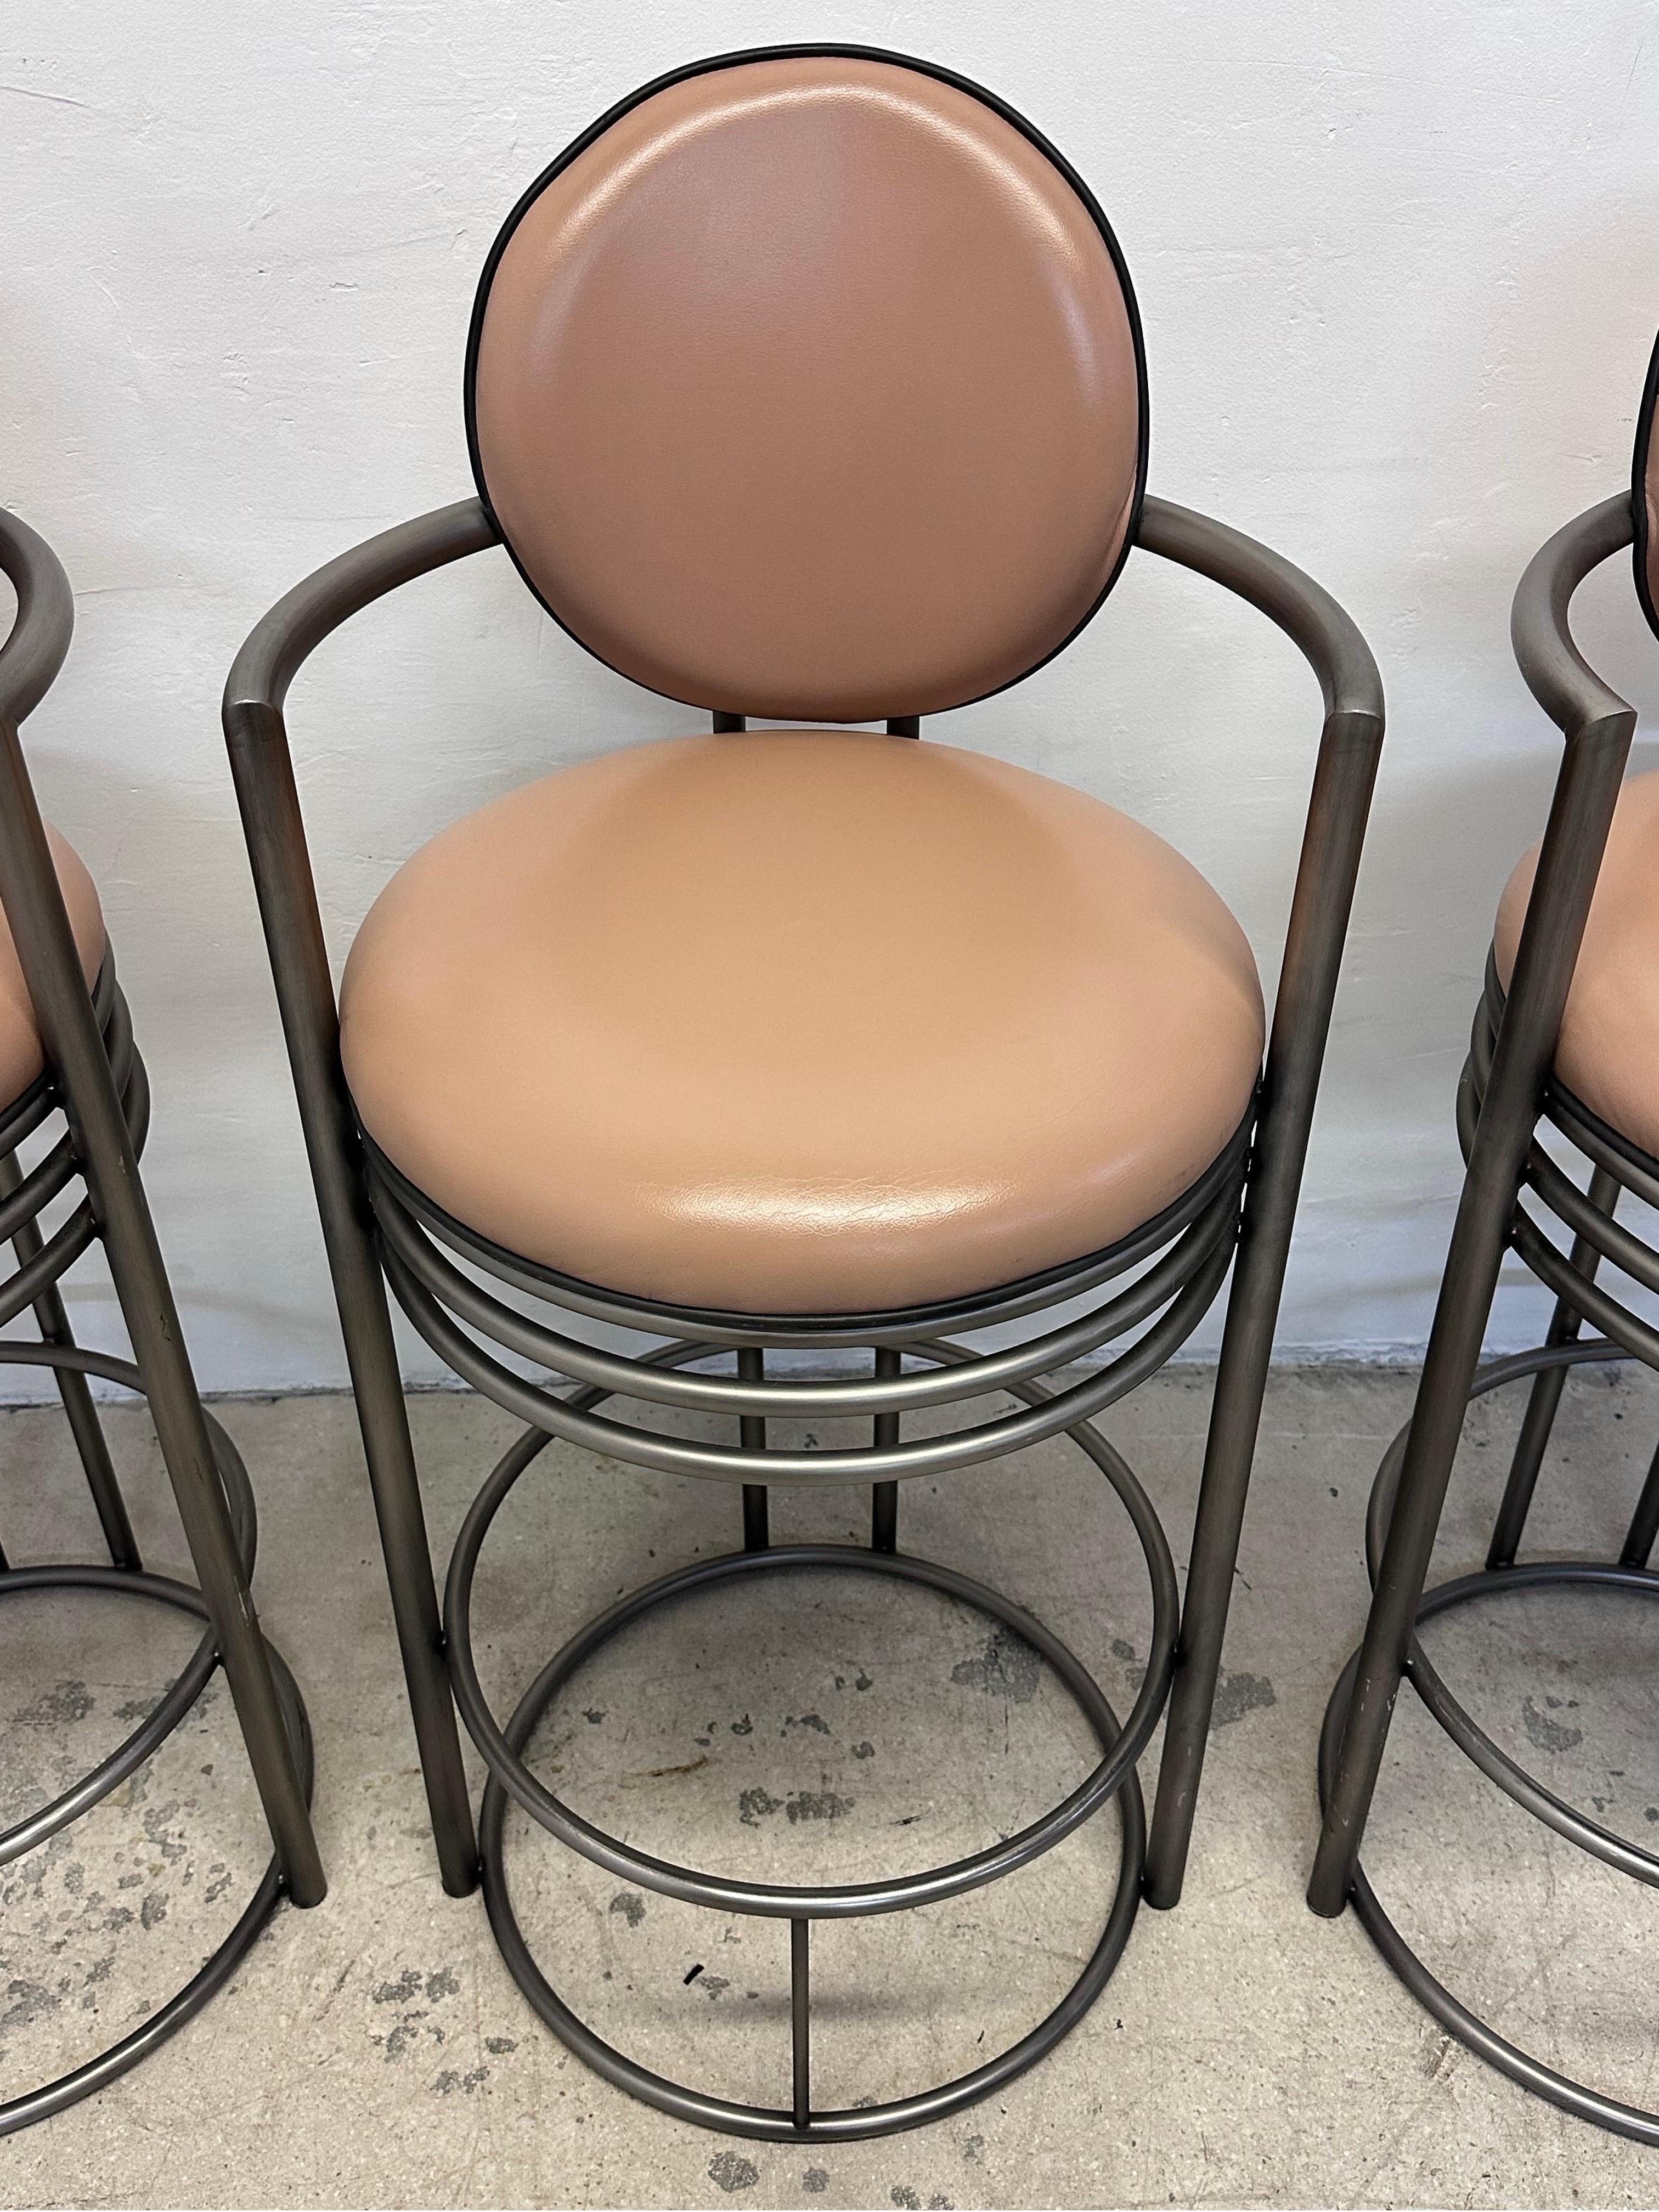 Design Institute America Deco Revival Bar Stools With Arms, 1980s - Set of Three For Sale 4